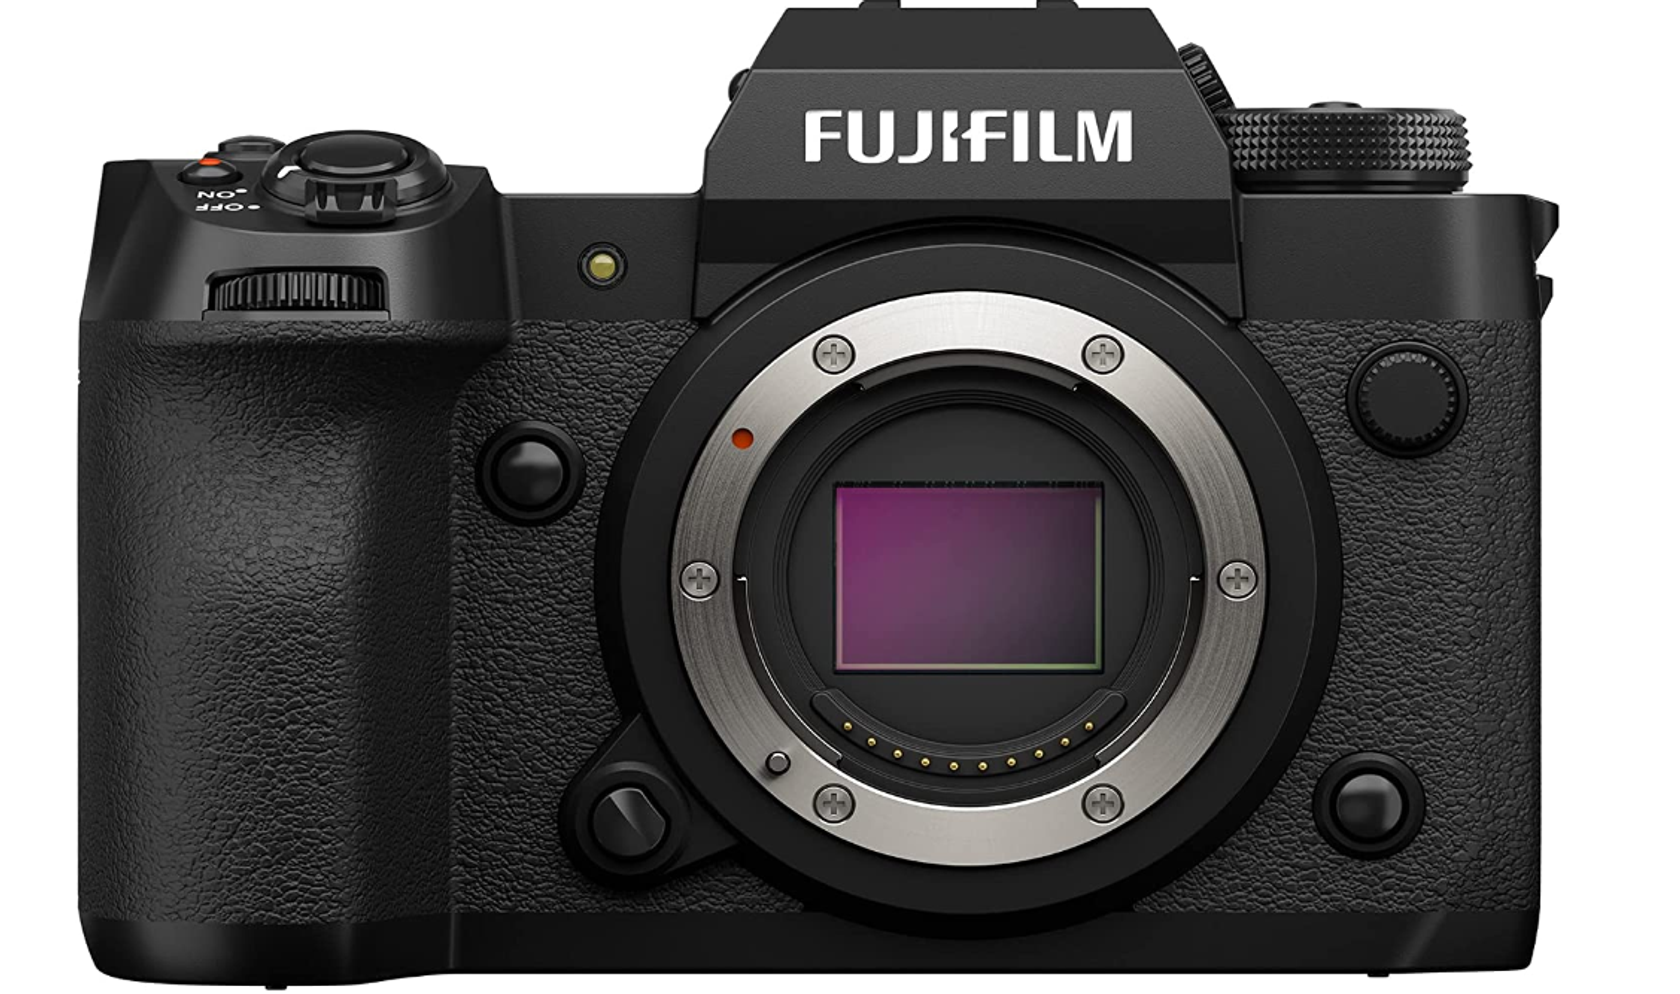 Opinion- X-T30ii is truly the best everyday carry and travel camera from  Fujifilm. Small, changeable lenses, more physical switches and most  importantly- in stock in most stores! : r/fujifilm